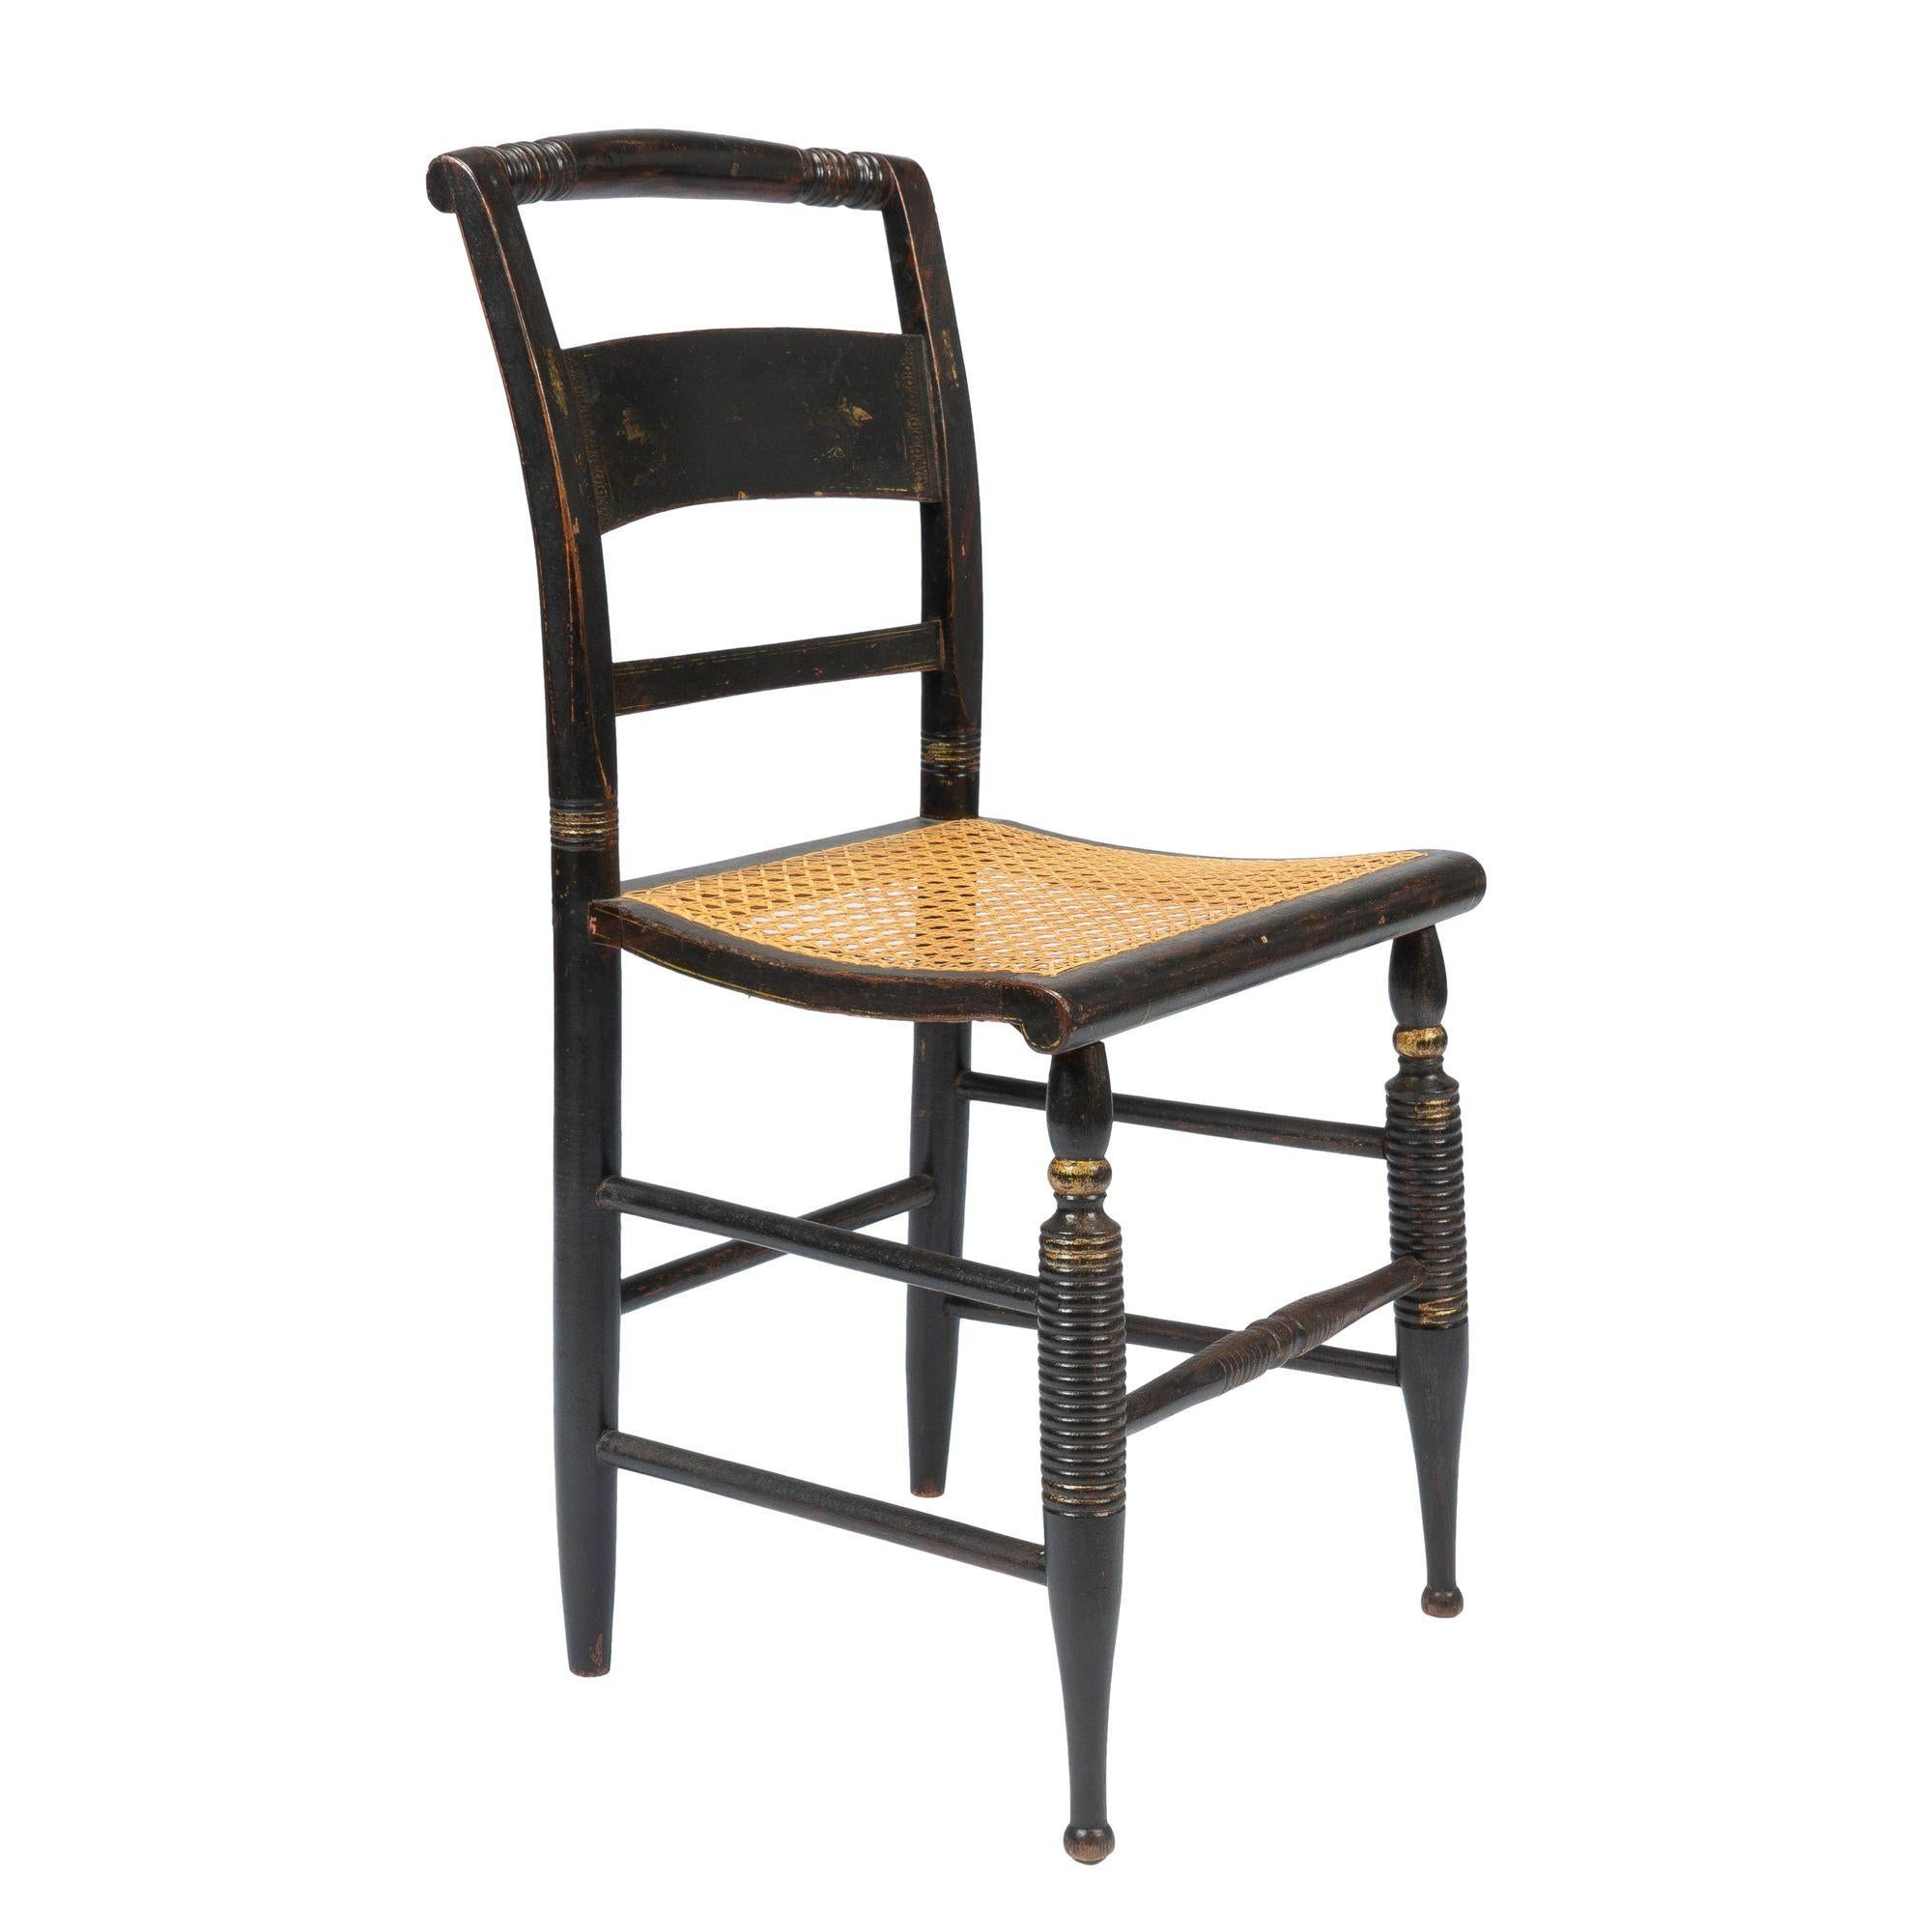 Lambert Hitchcock Caned Seat Side Chair '1825-1832' 2